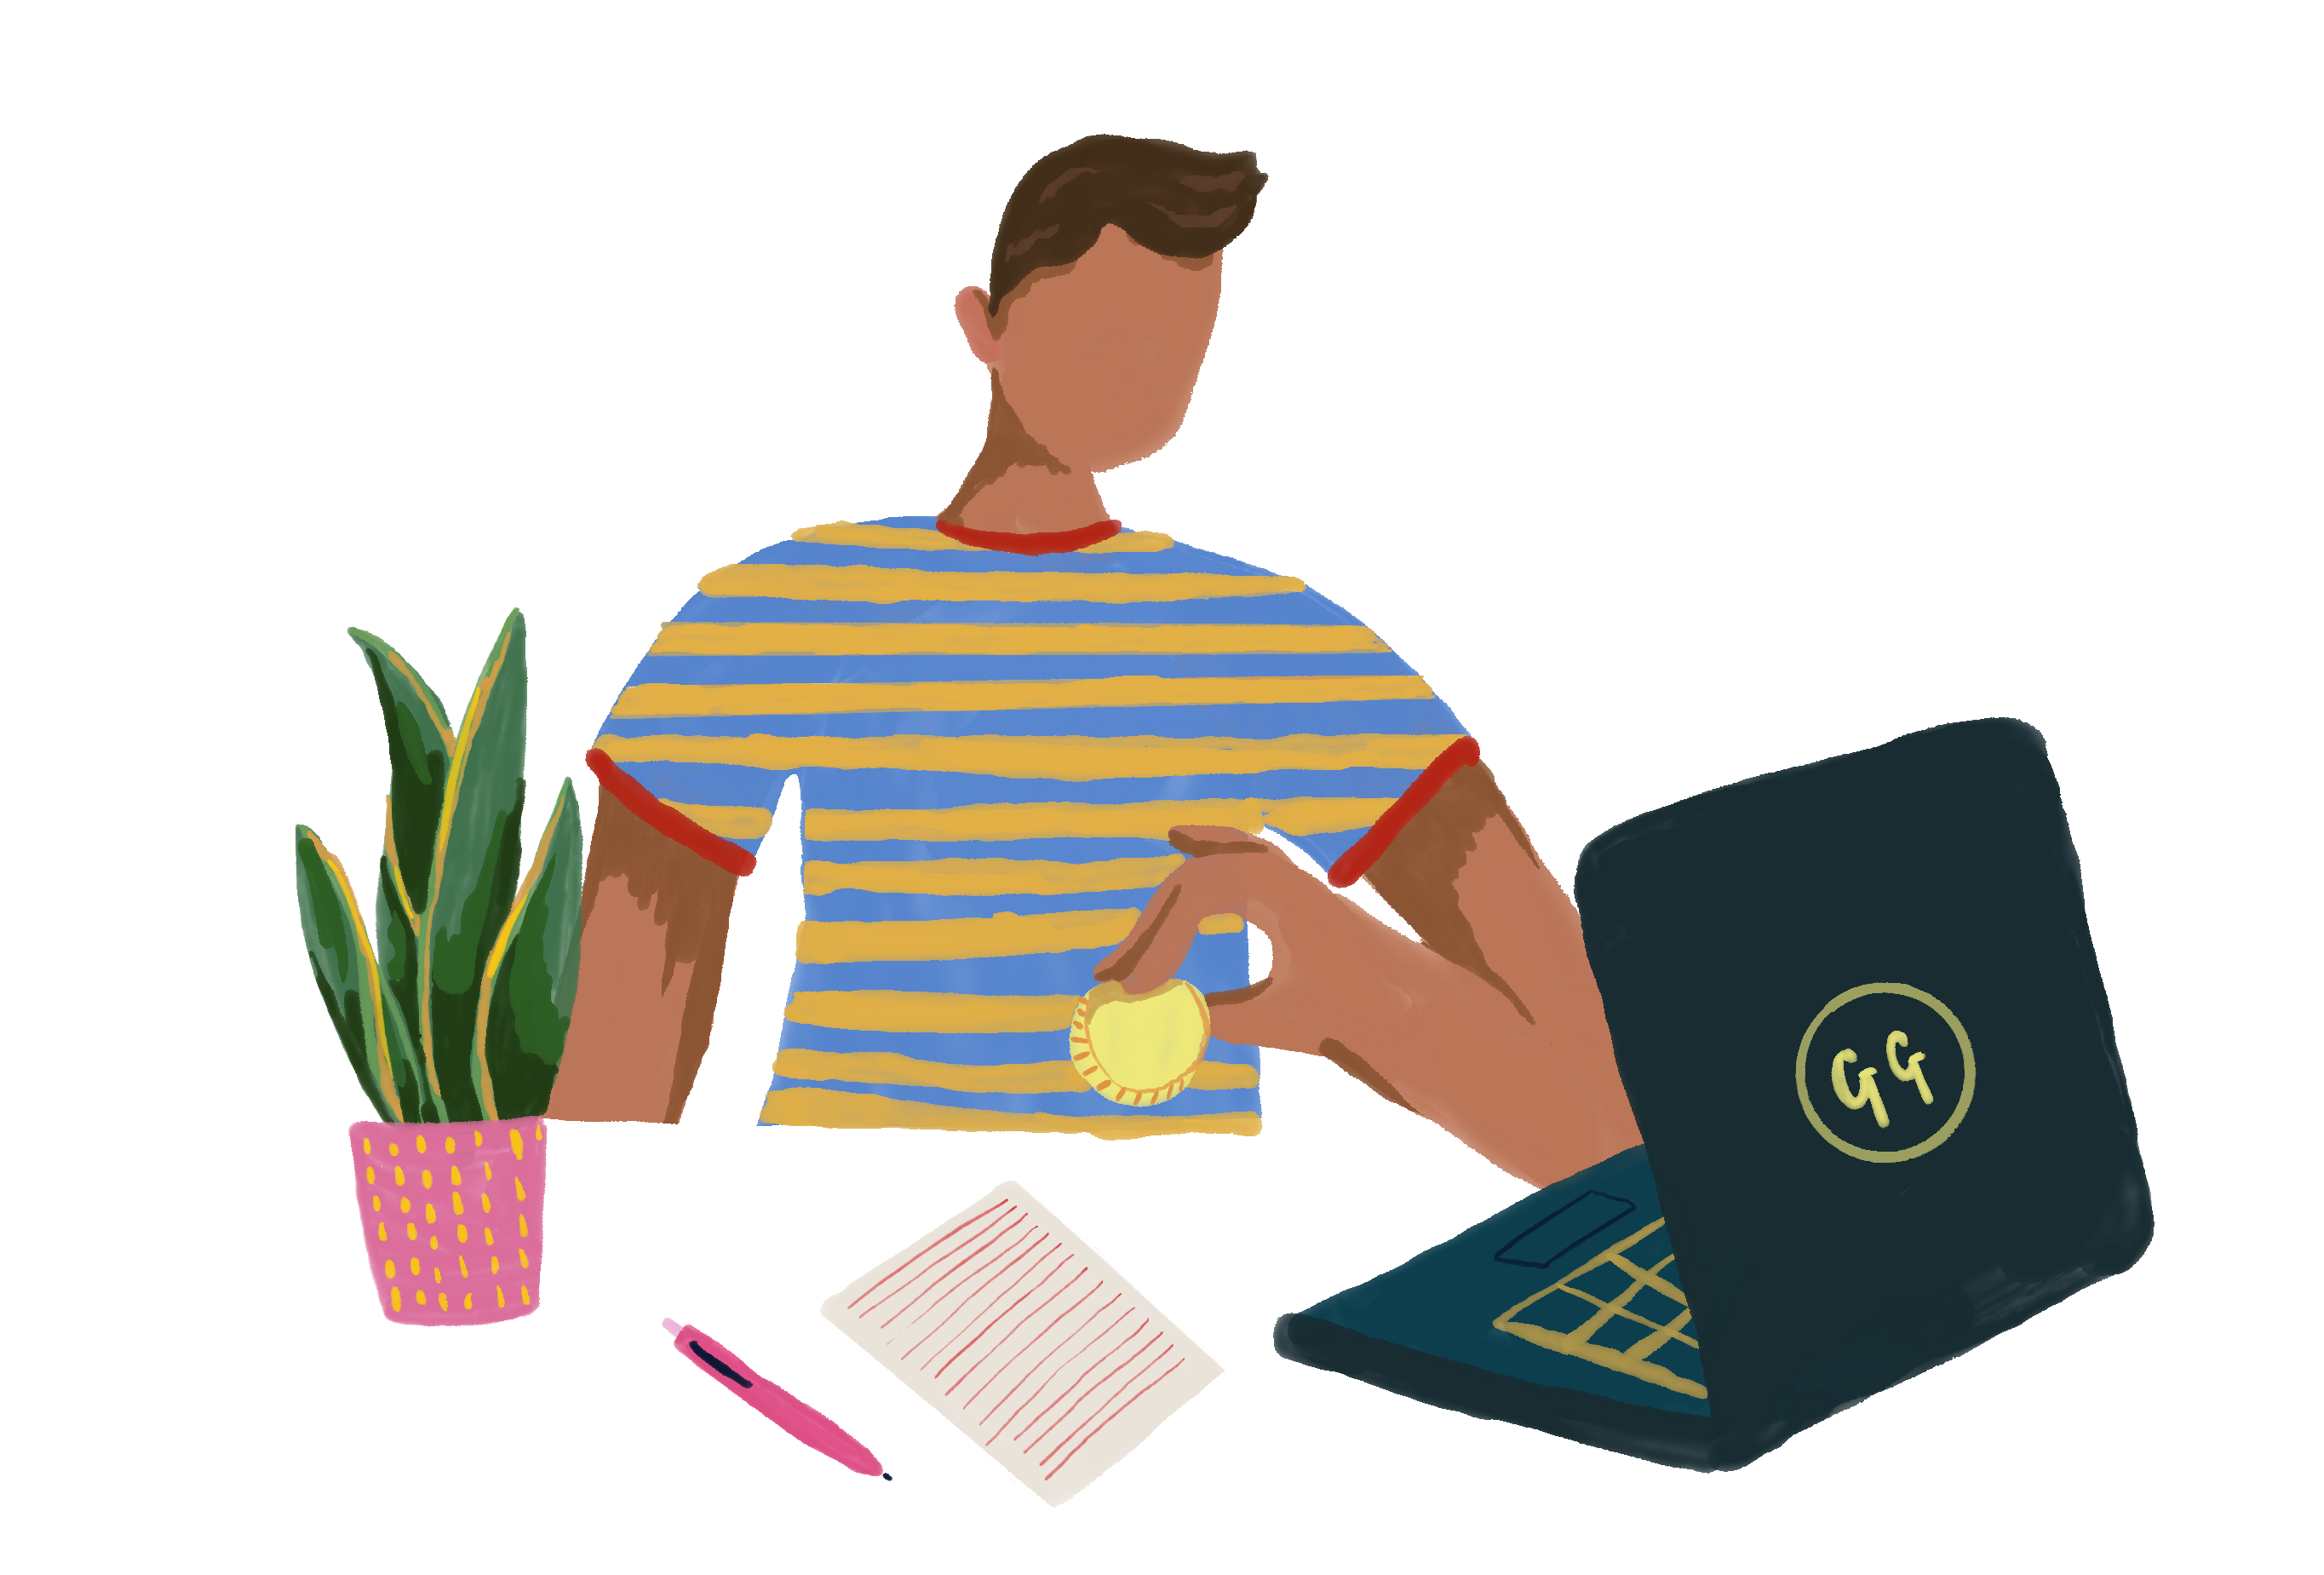 An illustration of a person looking at a laptop and taking notes